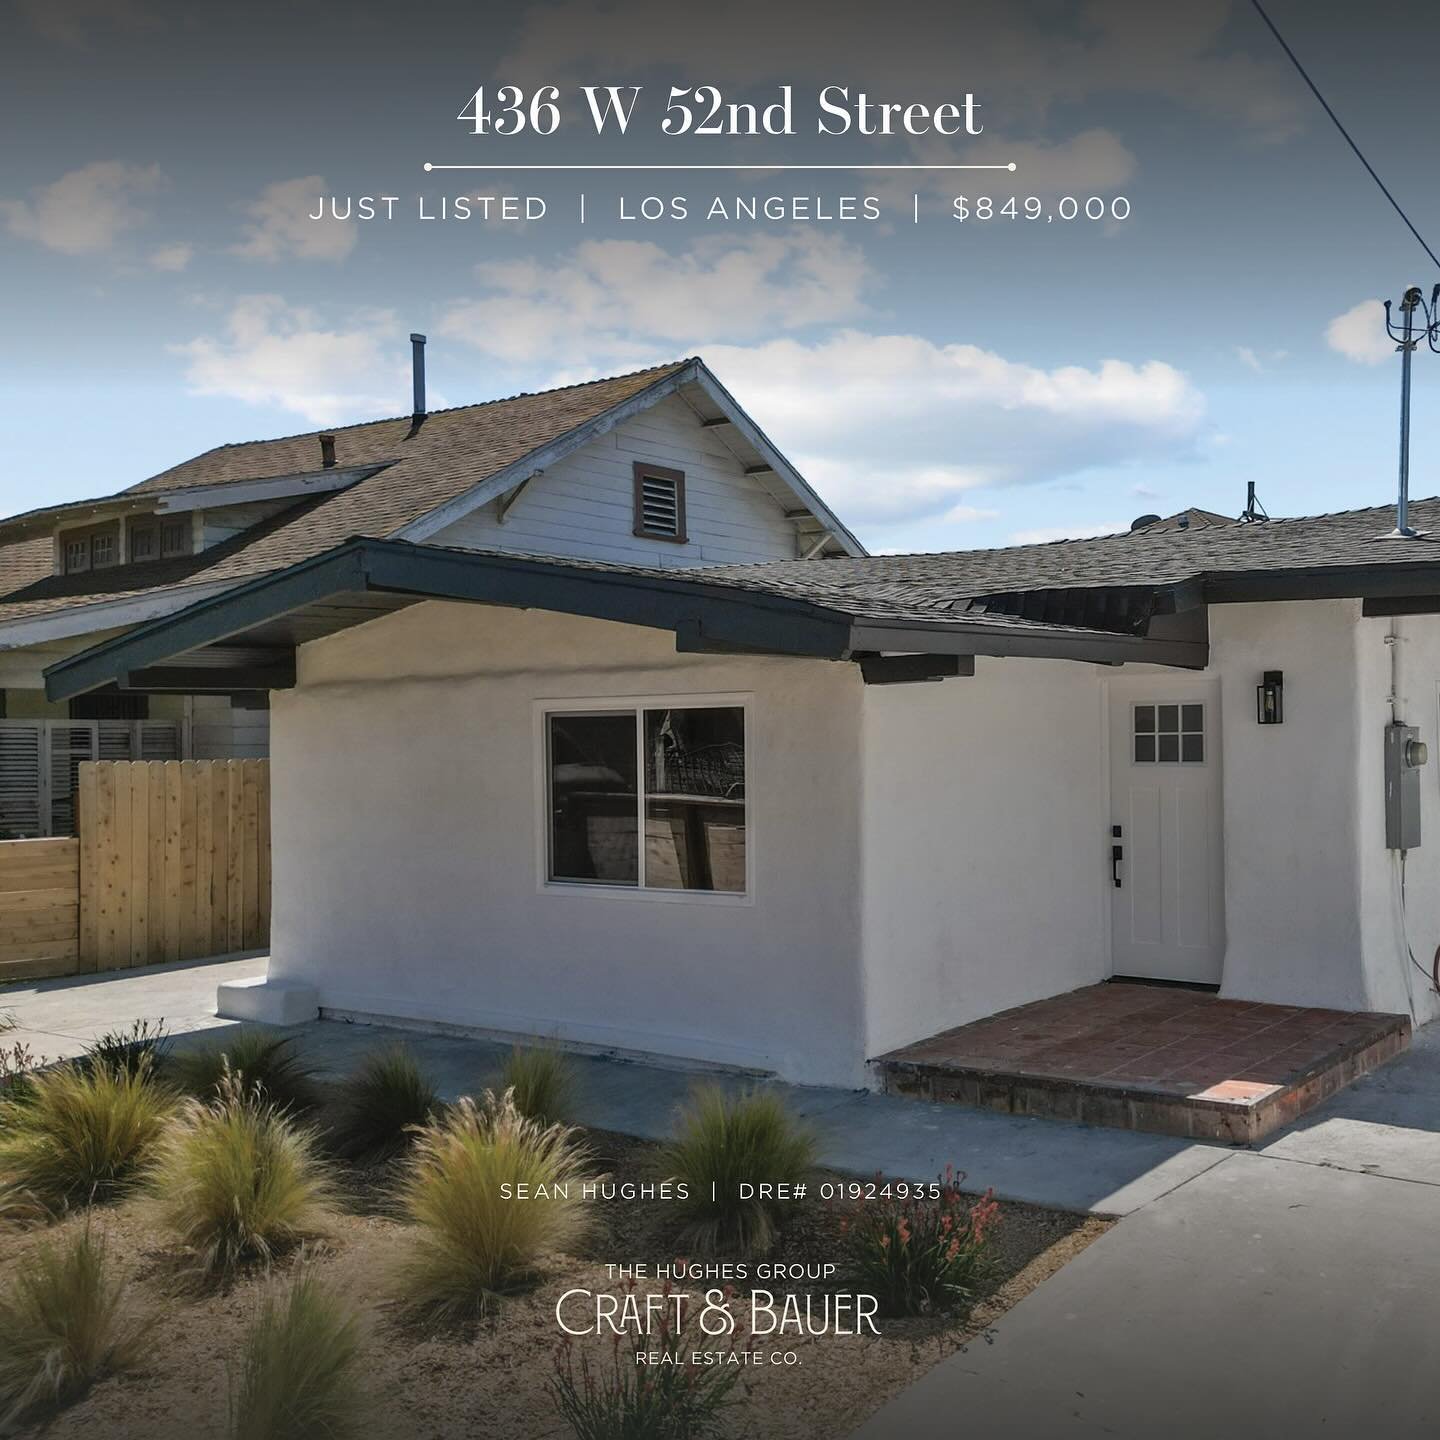 JUST LISTED 👉 Welcome home to a newly renovated gem nestled in the heart of LA&rsquo;s desirable 90037 neighborhood!⁠
⁠
🏡 436 W 52nd Street ⁠
📍 Los Angeles, CA⁠
💰 $849,000⁠
⁠
Step inside to discover the spacious and light-filled interior, adorned